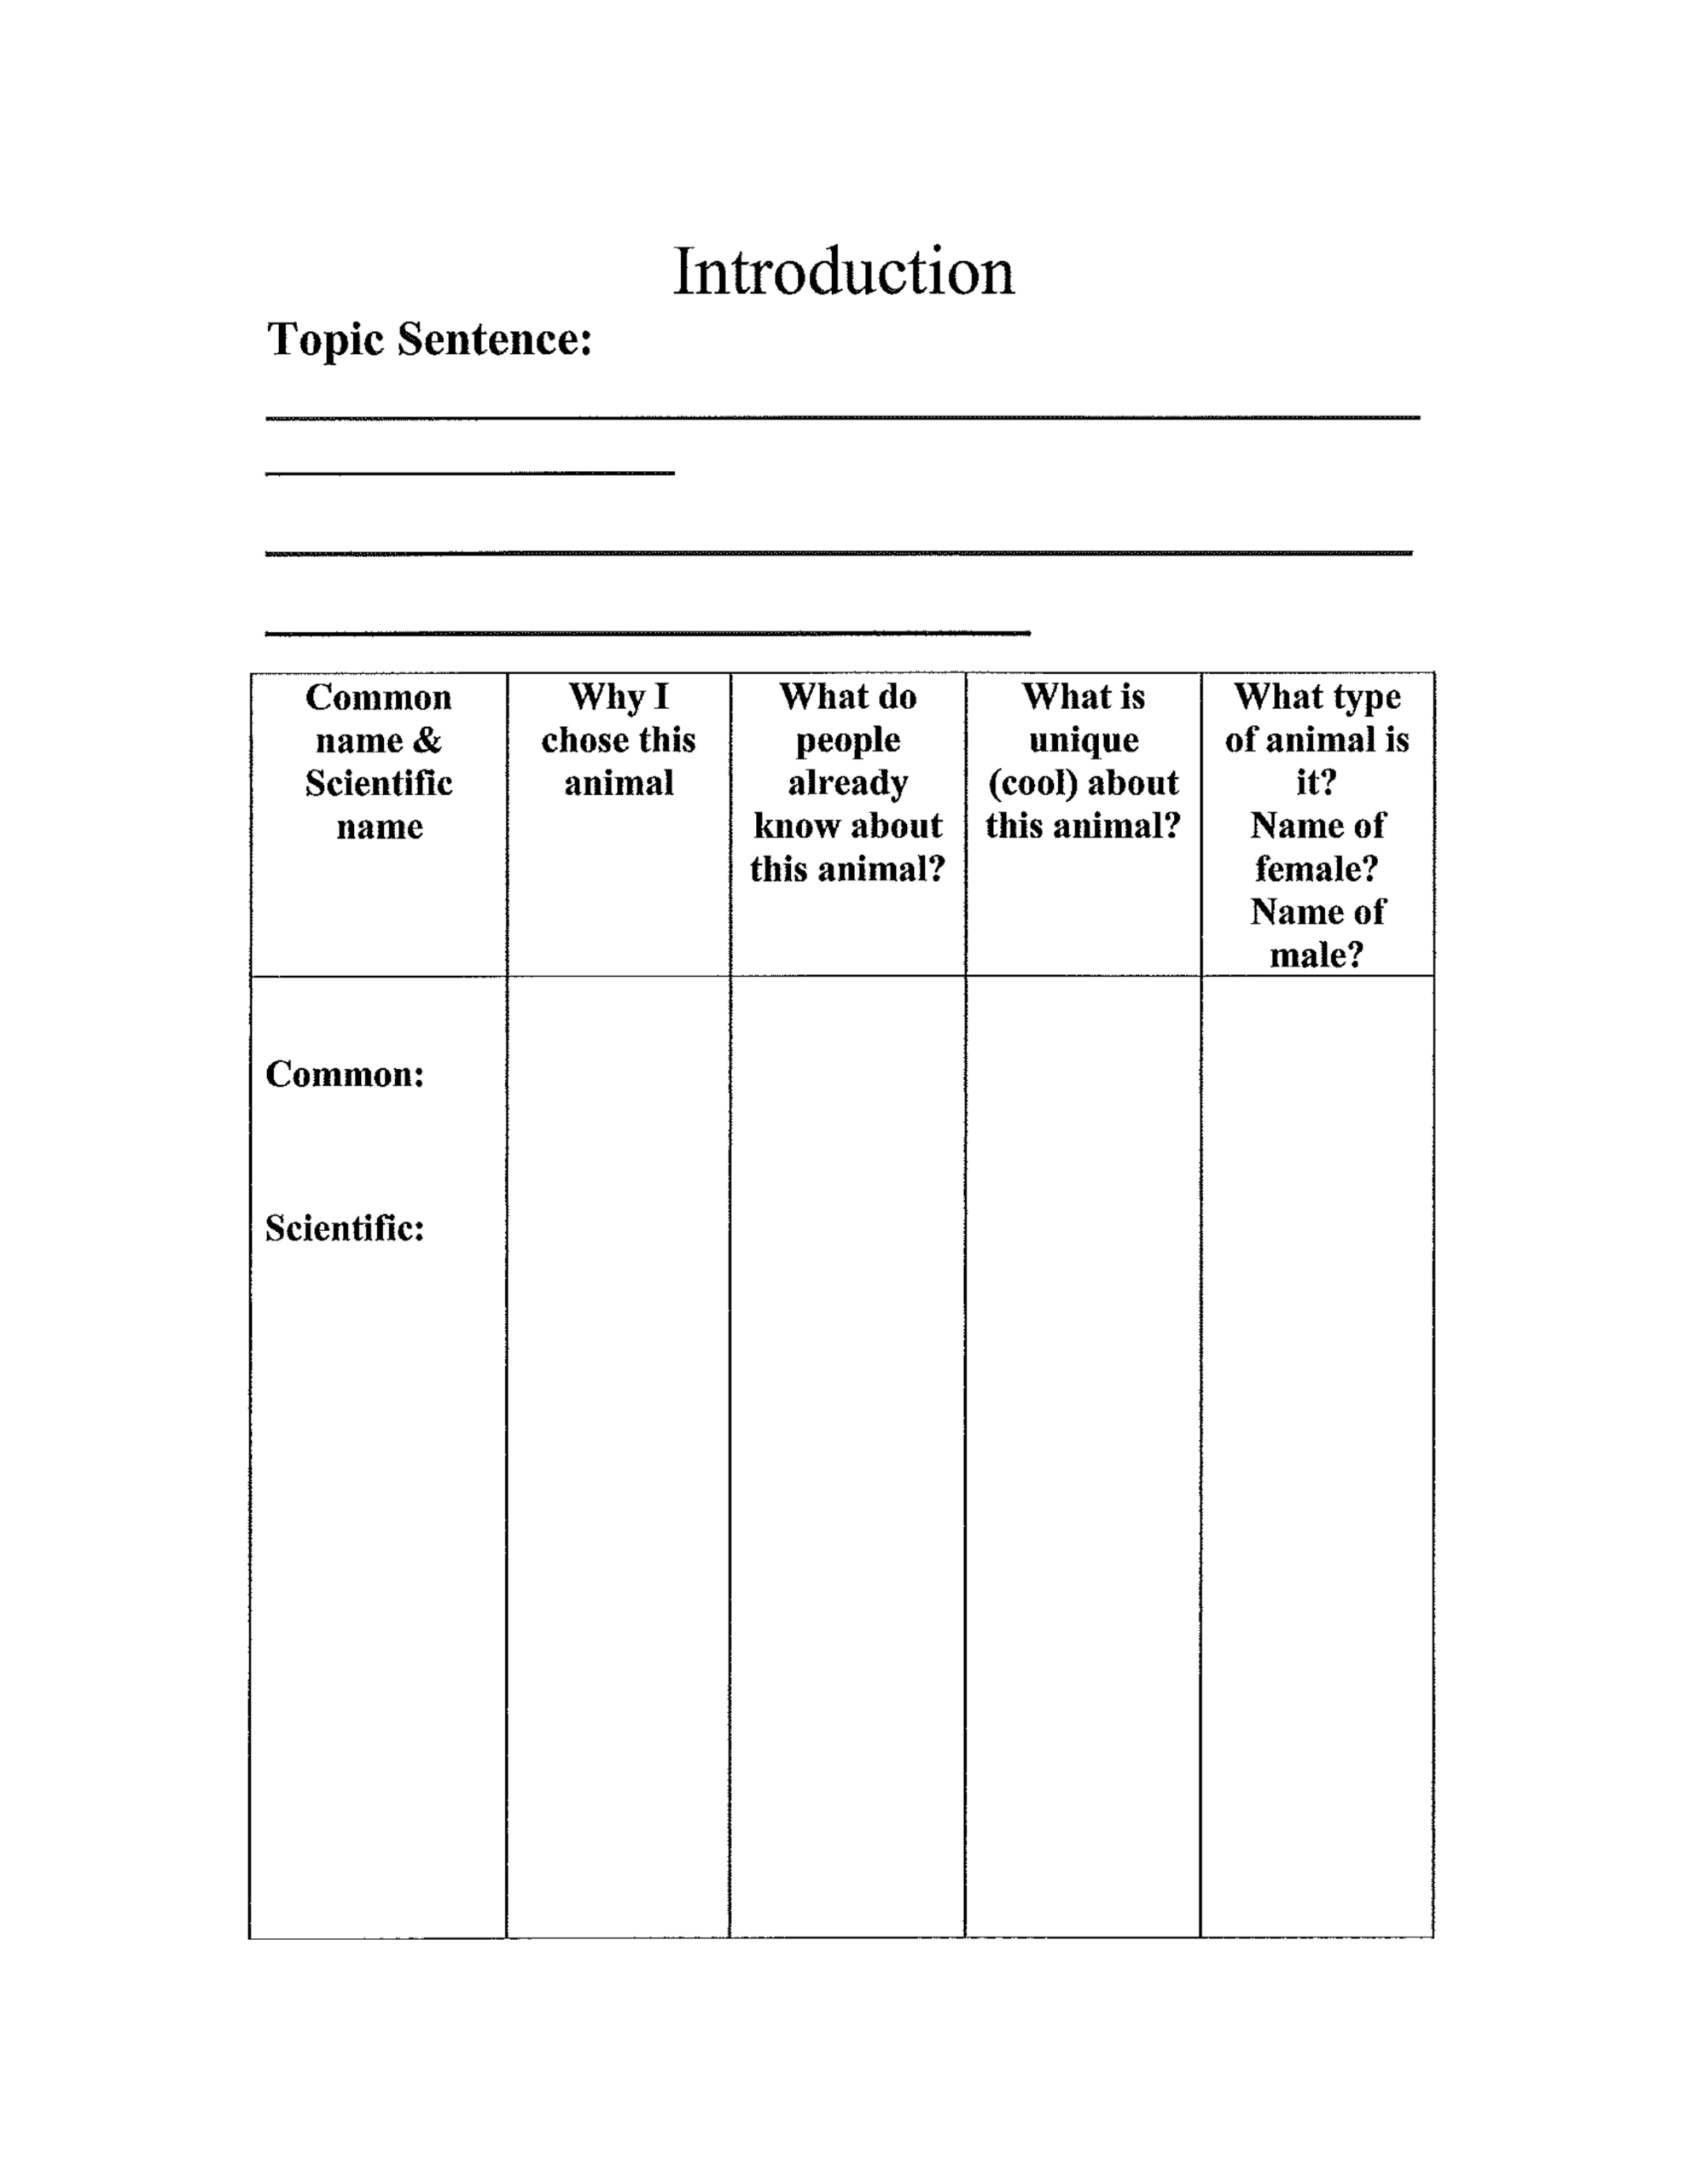 3Rd Grade Animal Report Template Free Download Pertaining To Animal Report Template